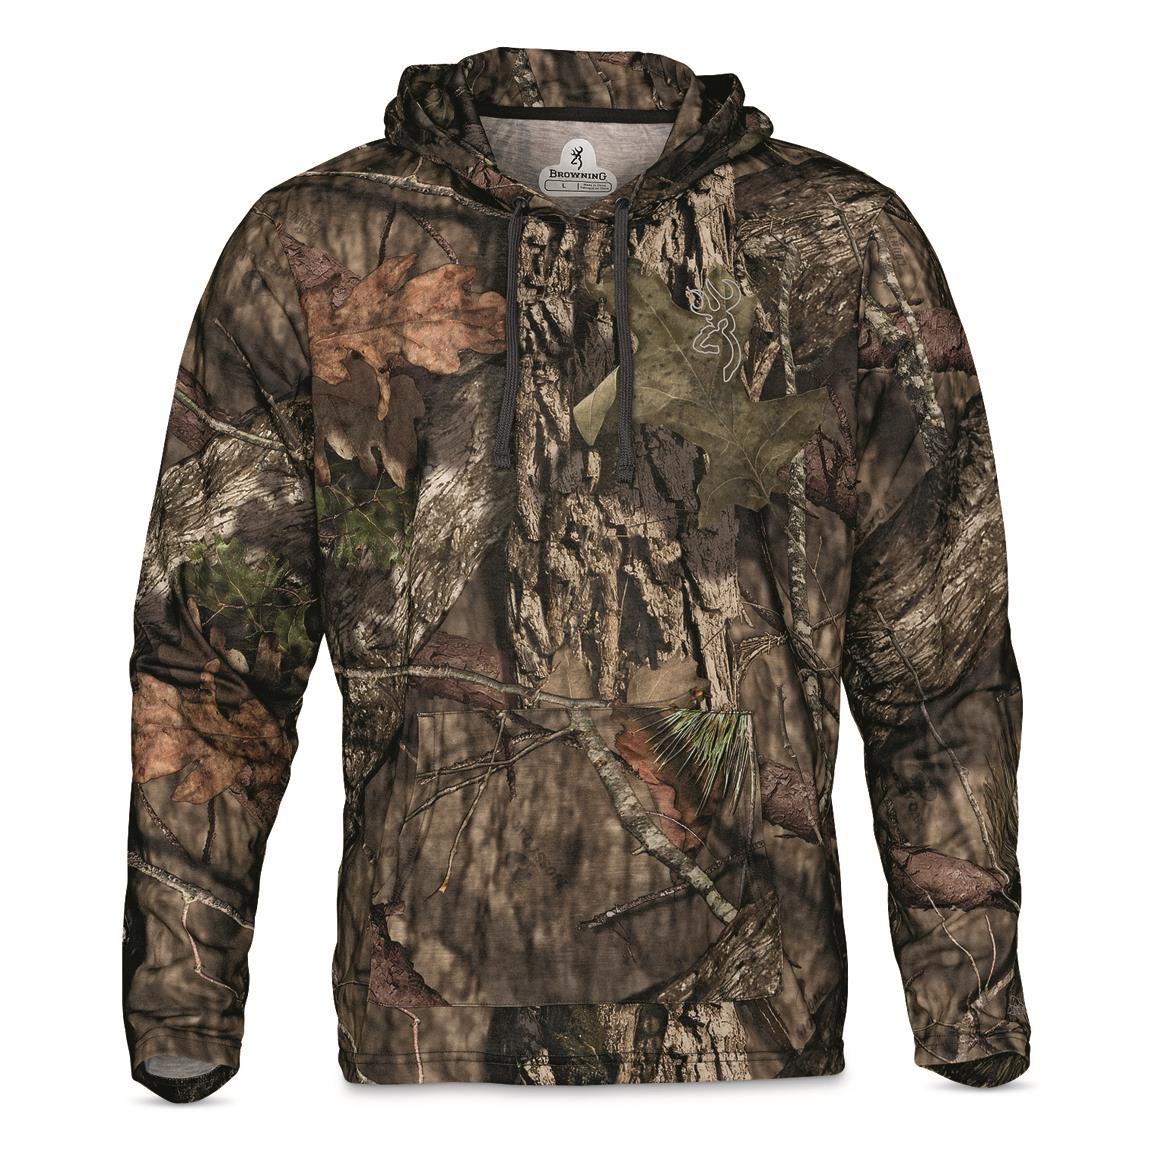 Synthetic lightweight fabric keeps you cool while on your feet, Mossy Oak Break-Up® COUNTRY™